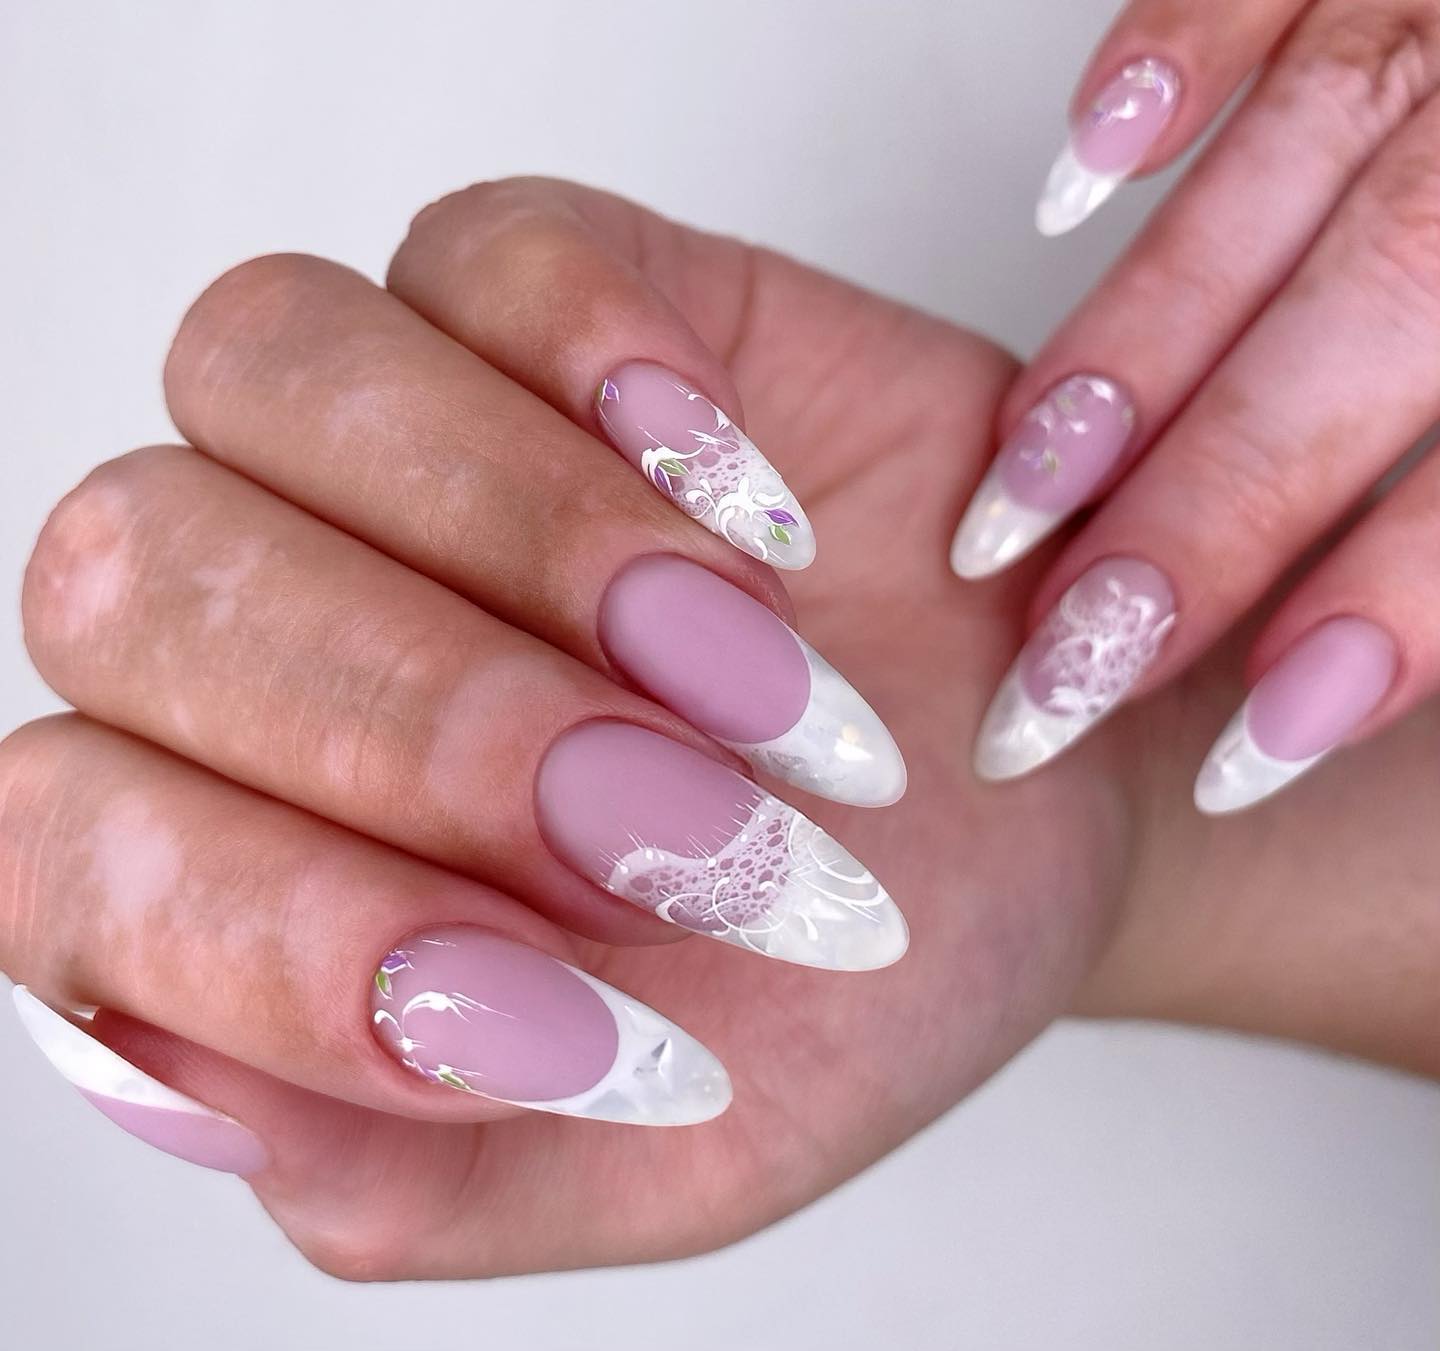 Brides who like to have long almond nails will adore these wedding nails. Being one of the classics, a French mani is taken to a different level with matte nail polish and some white lace nail art on top it.